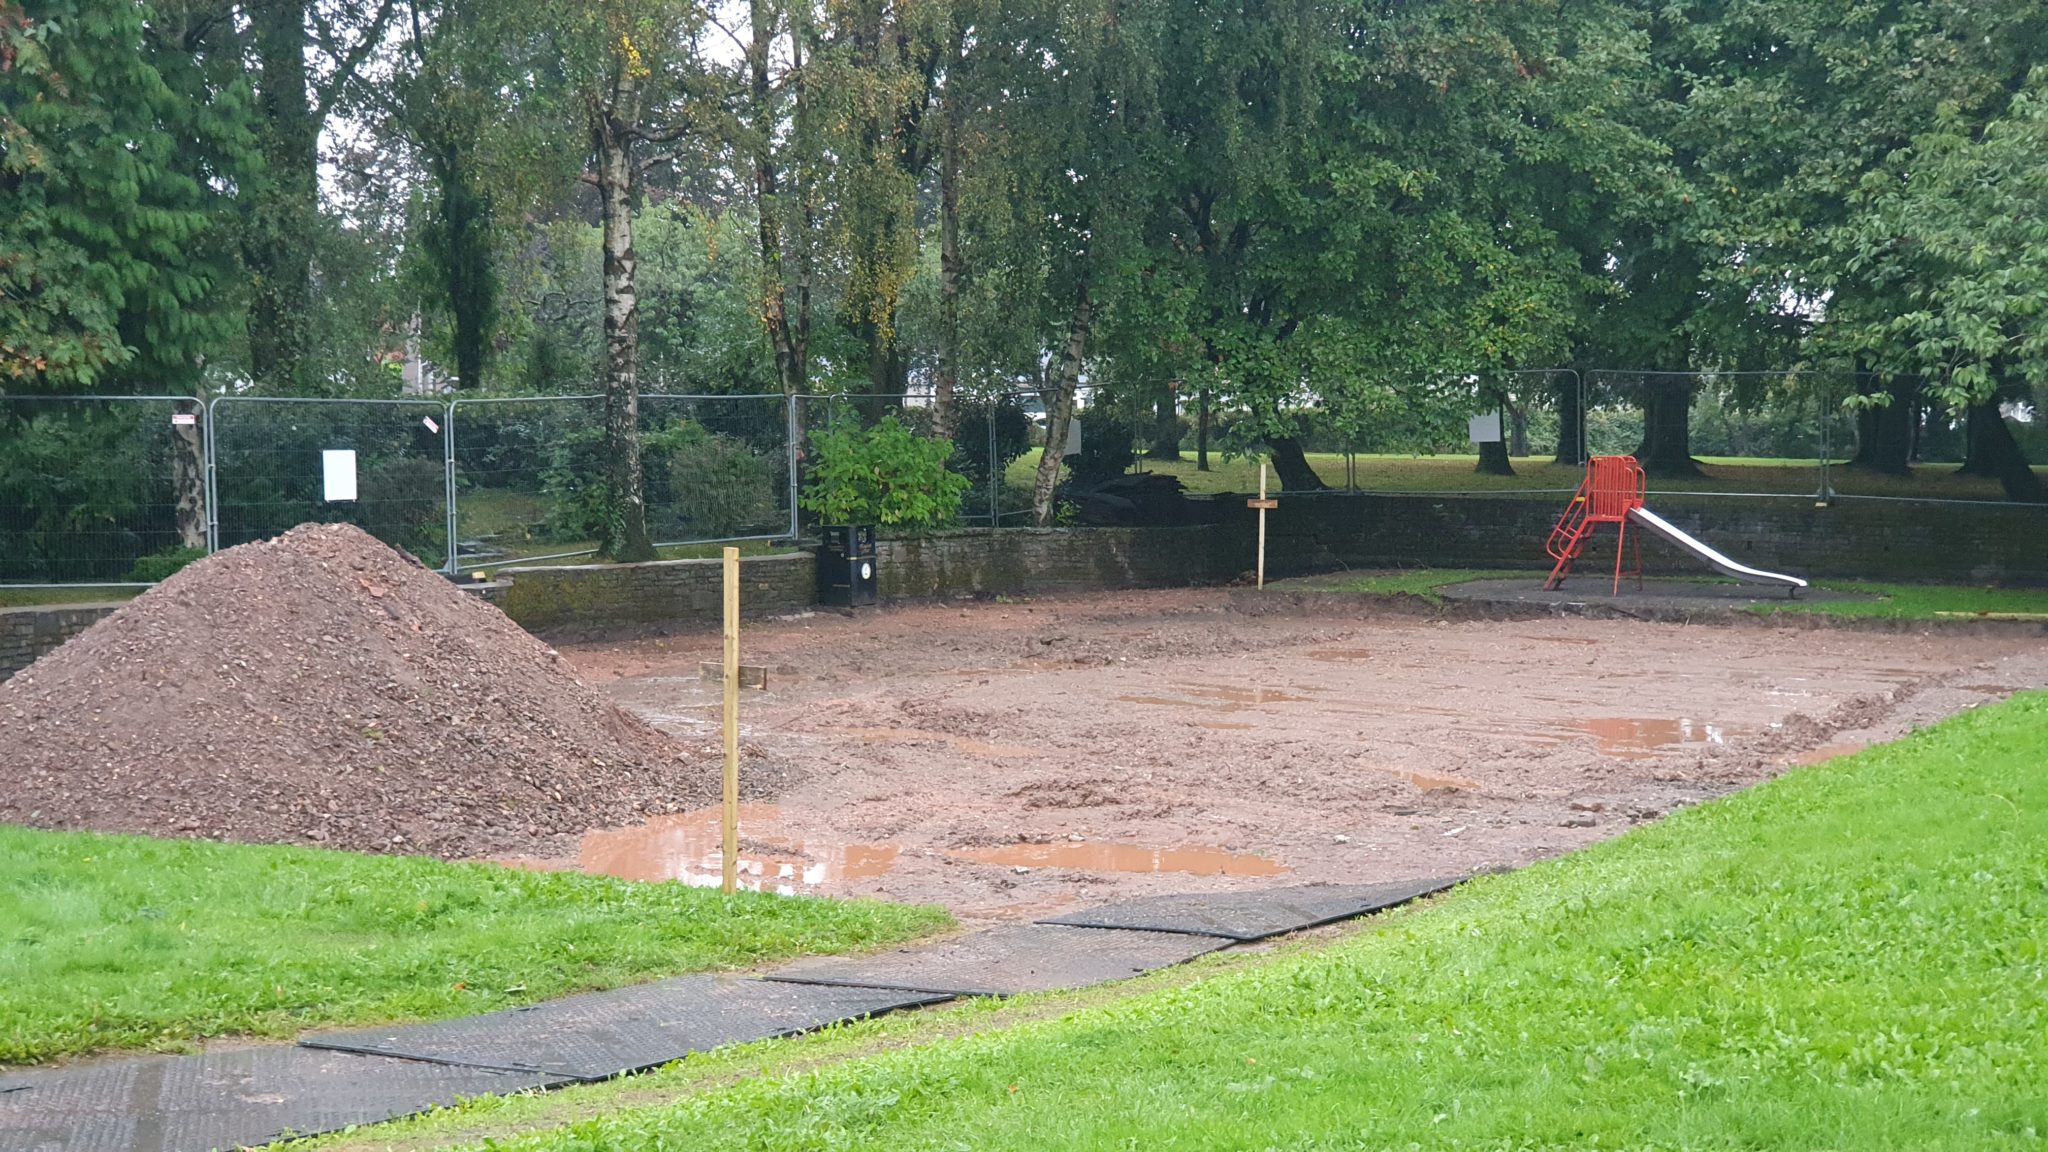 The building site in Oakfield Flower Gardens